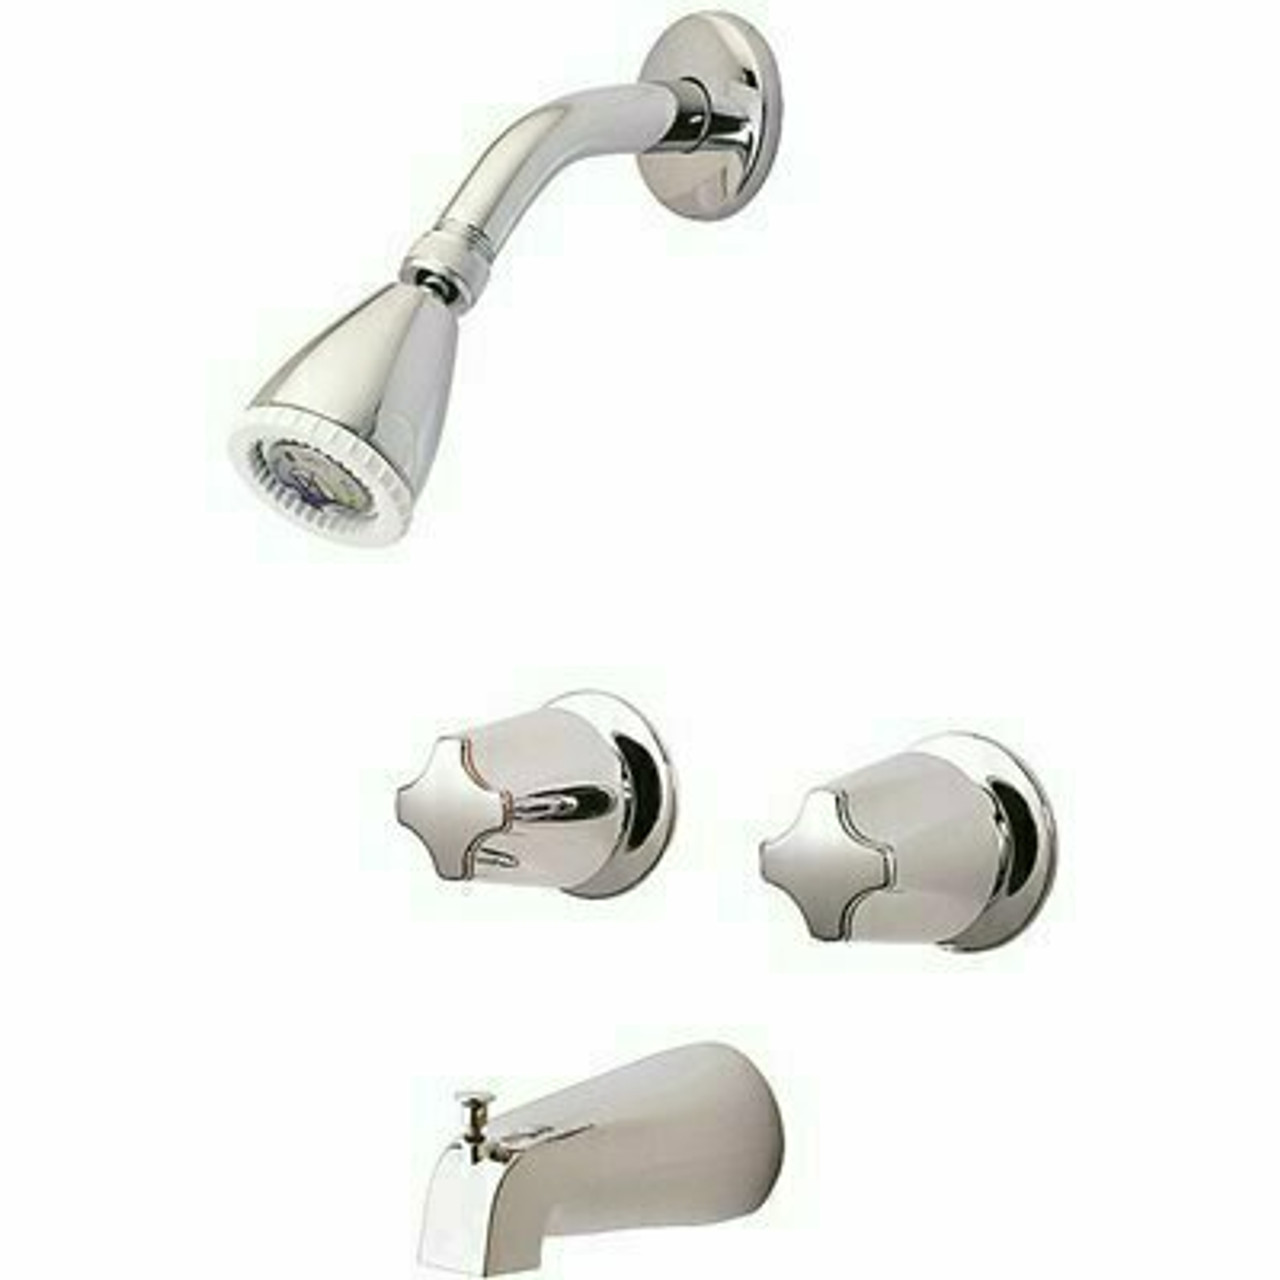 Pfister 2-Handle 1-Spray Tub And Shower Faucet With Metal Knob Handles In Polished Chrome (Valve Included)